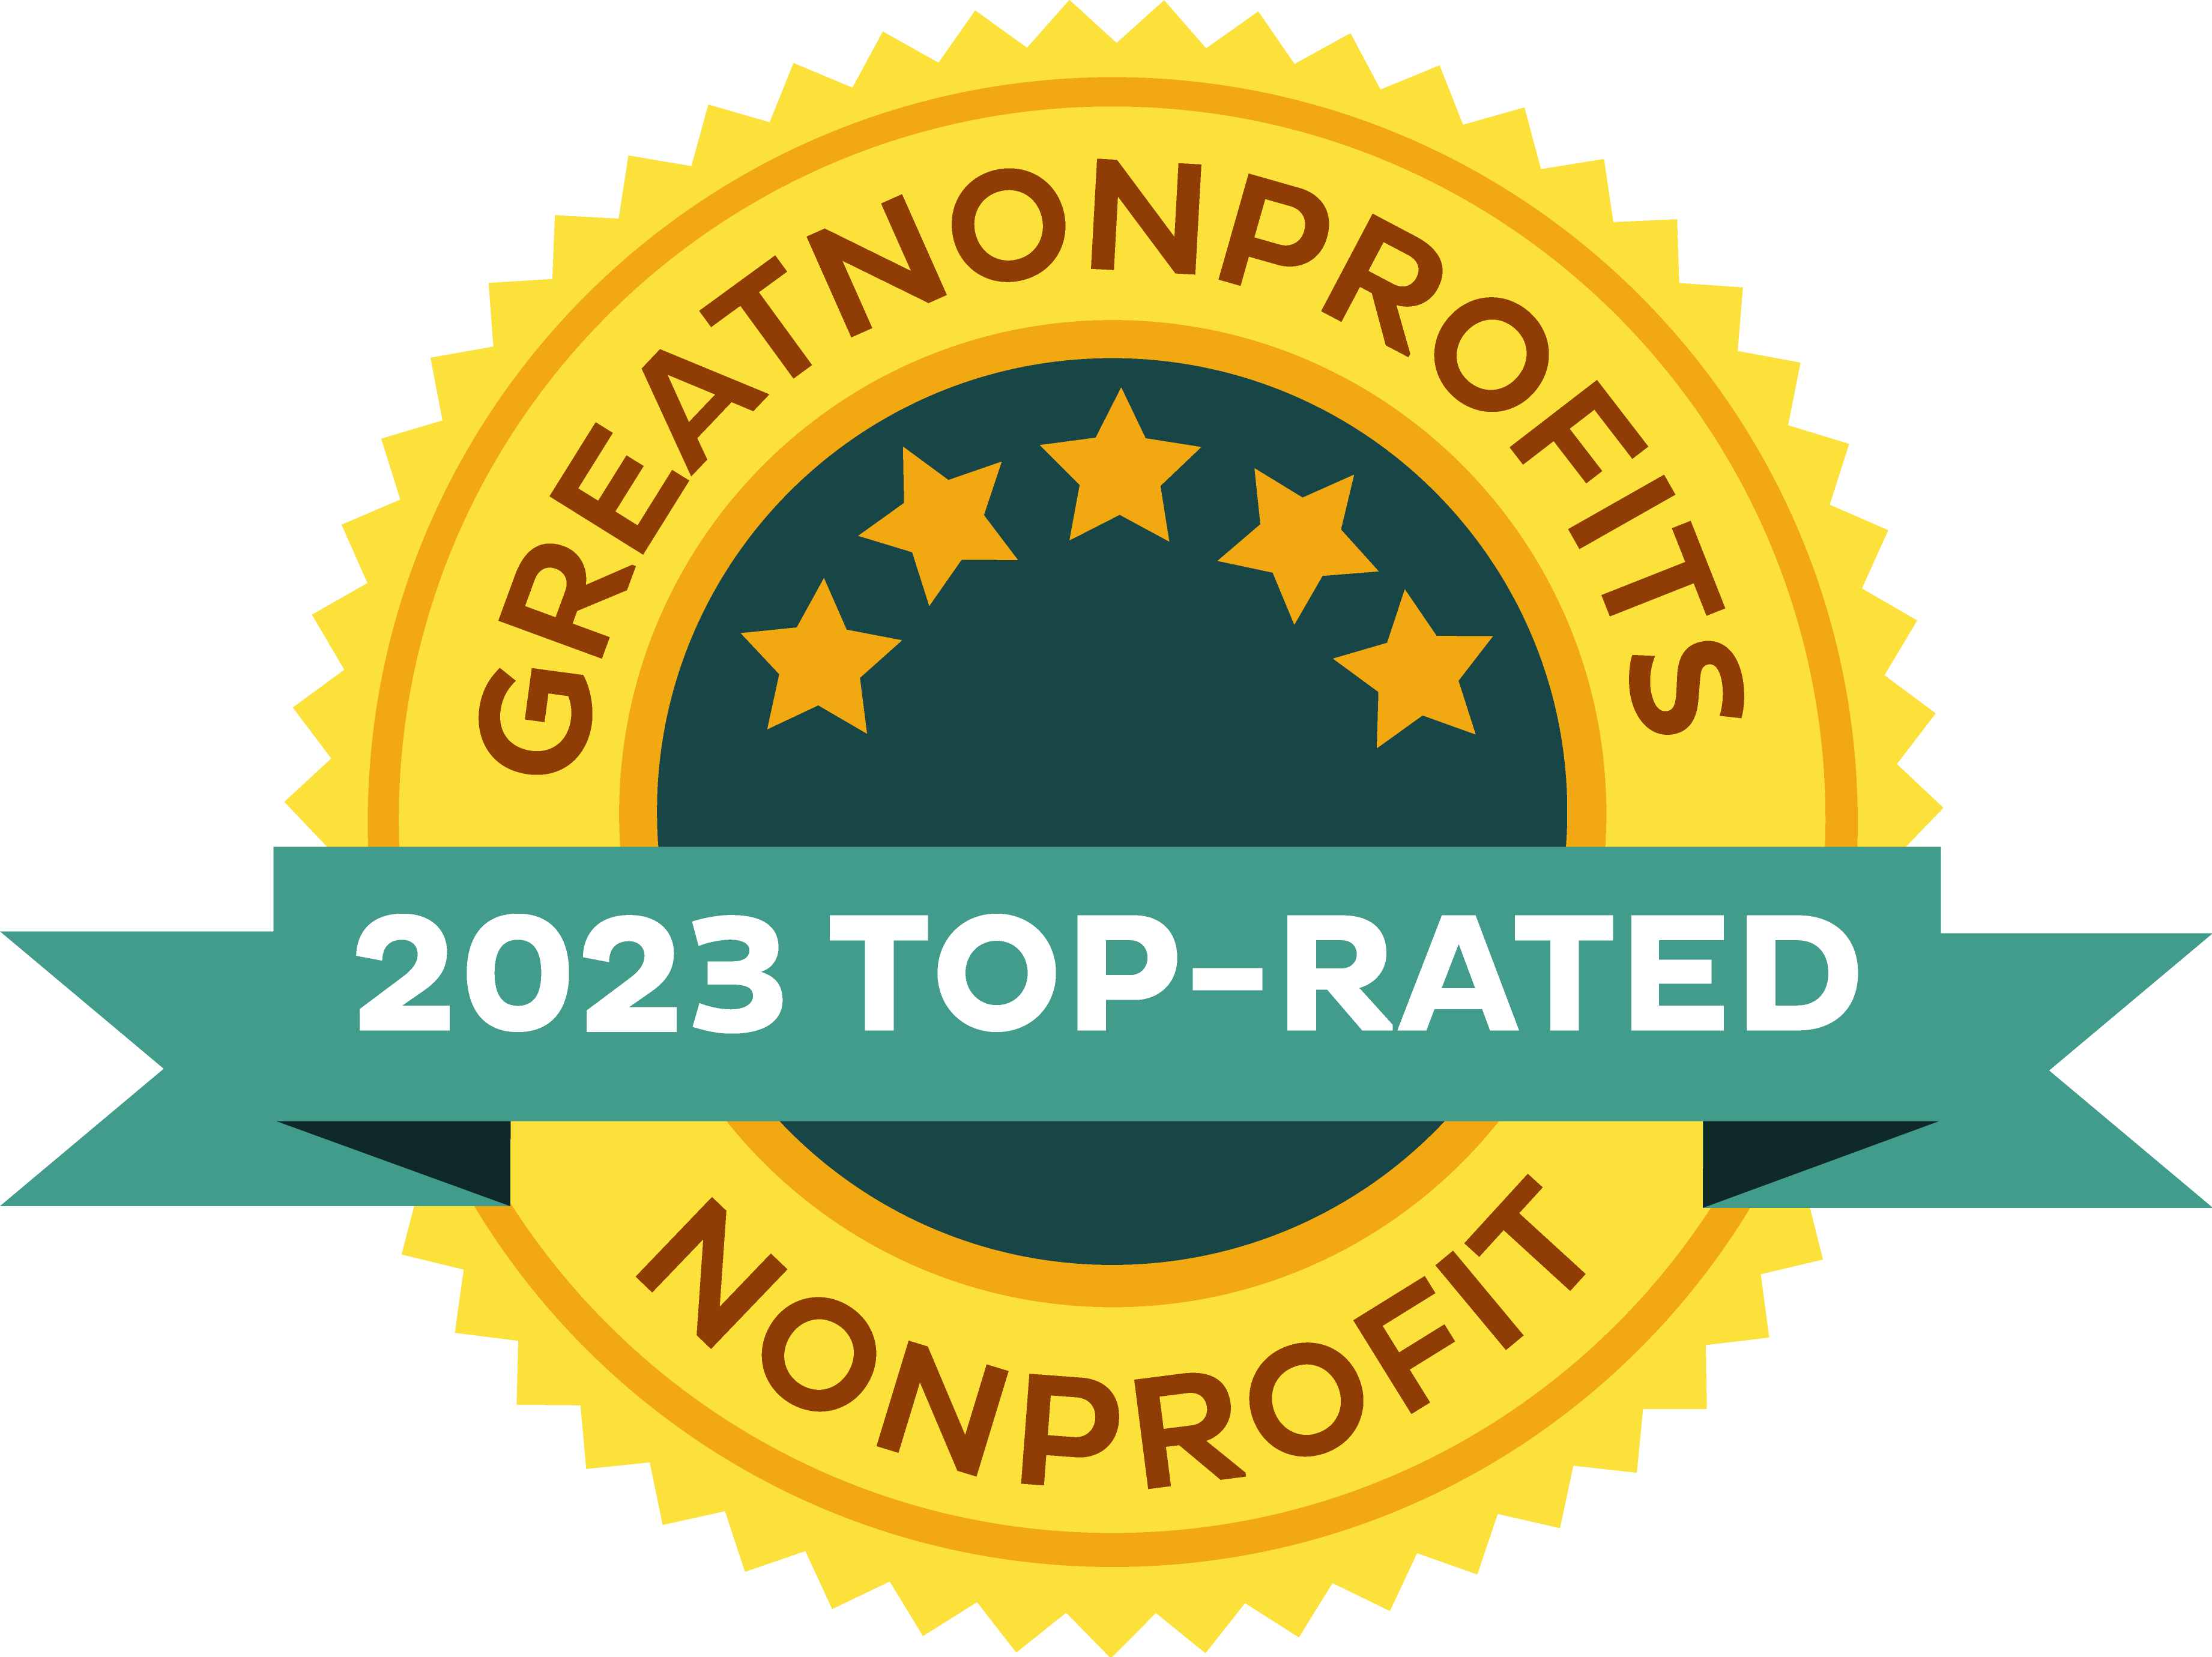 Task Force Dagger Special Operations Foundation Nonprofit Overview and Reviews on GreatNonprofits